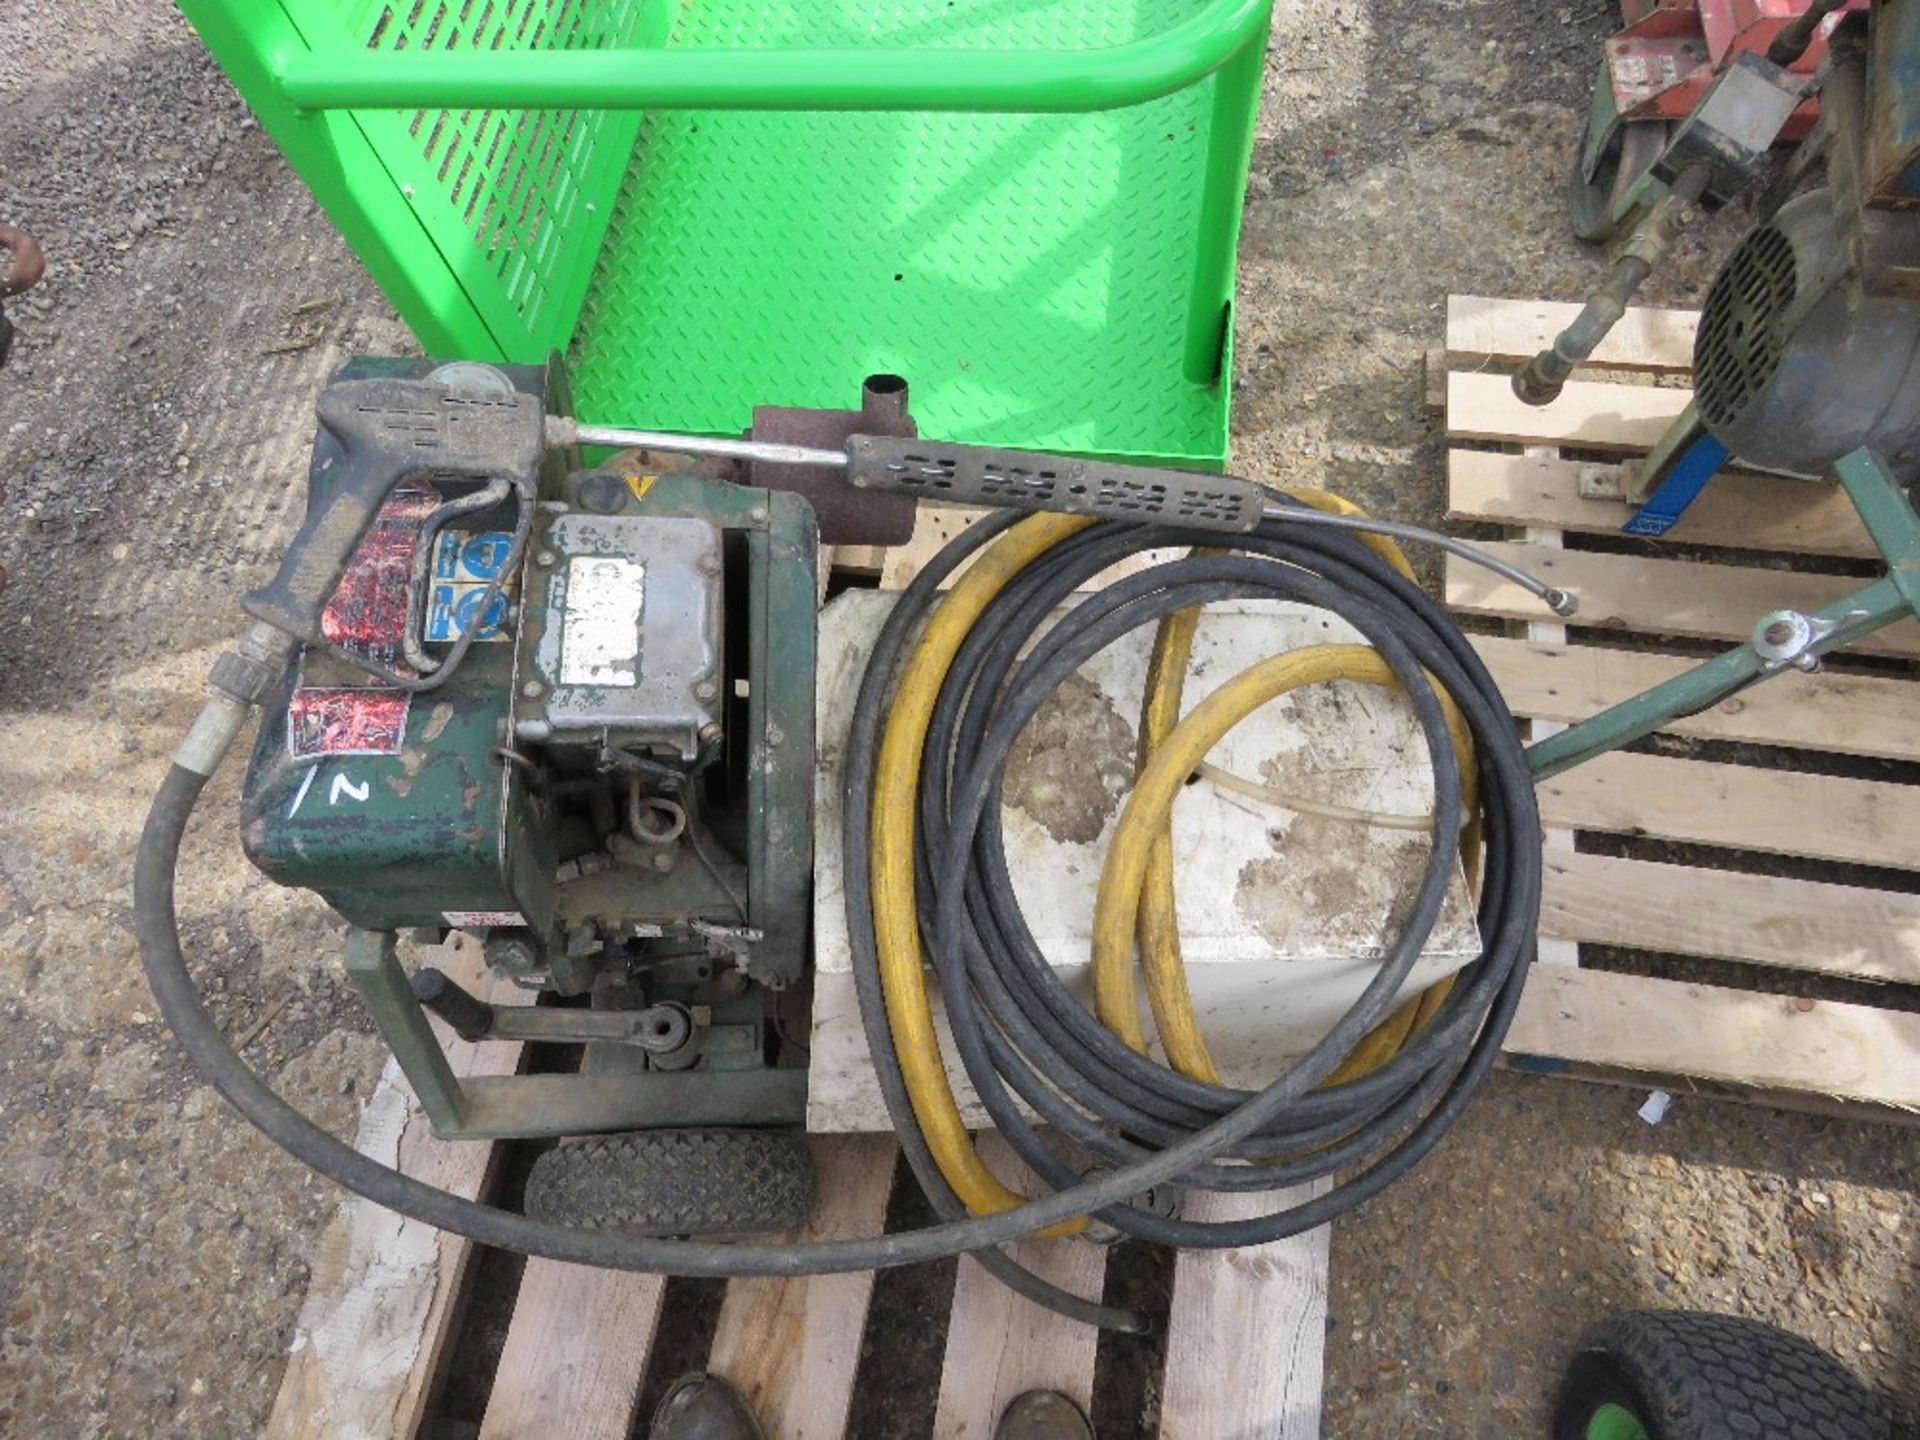 BRENDON HANDLE START DIESEL ENGINED PRESSURE WASHER. WHEN TESTED WAS SEEN TO START AND RUN. DIRECT - Image 2 of 3